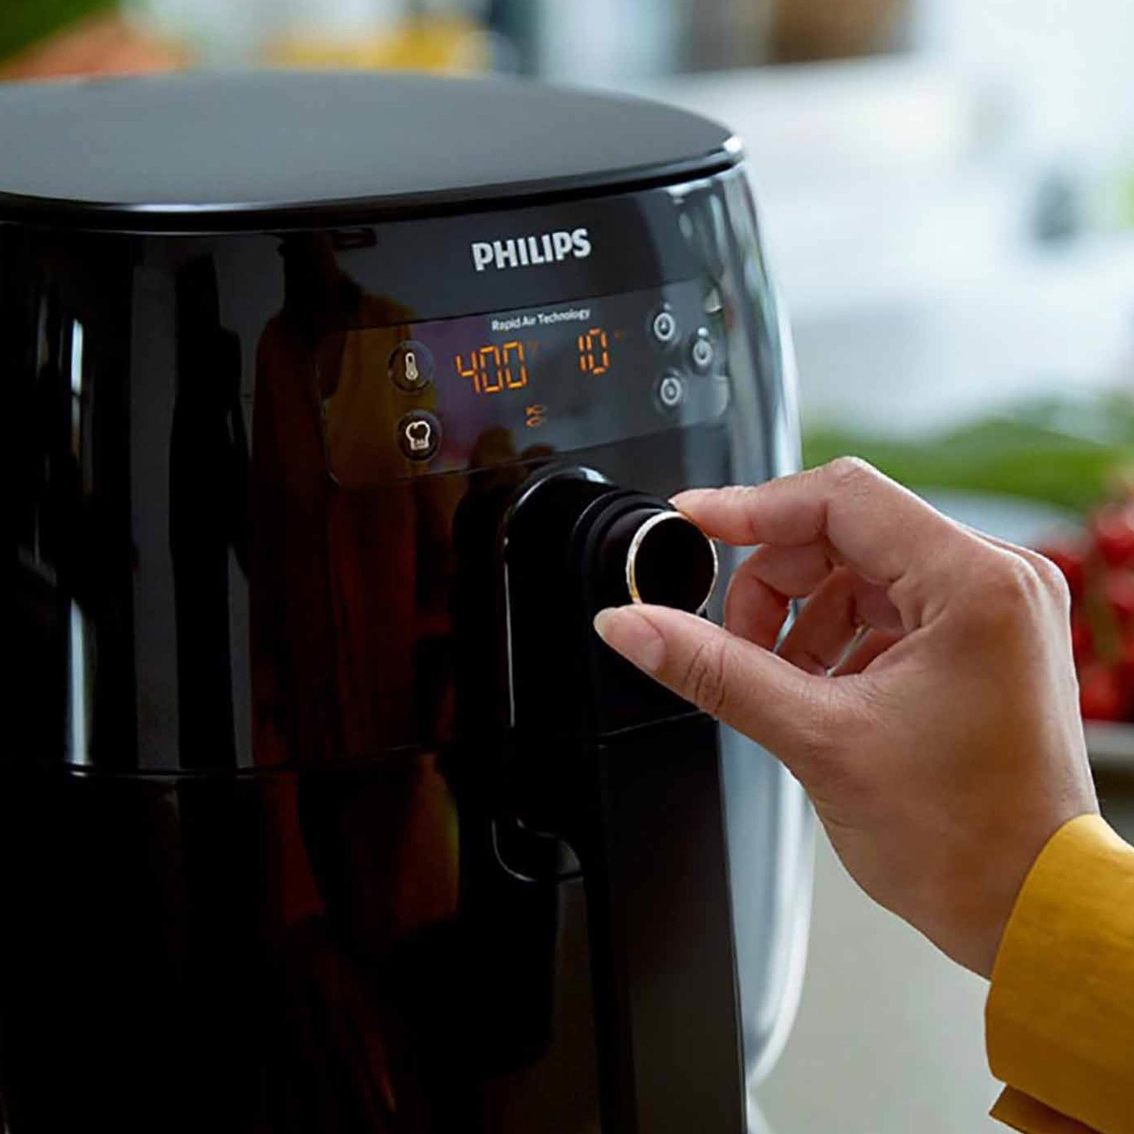 Philips Avance Collection Airfryer, Black - Image 2 of 3